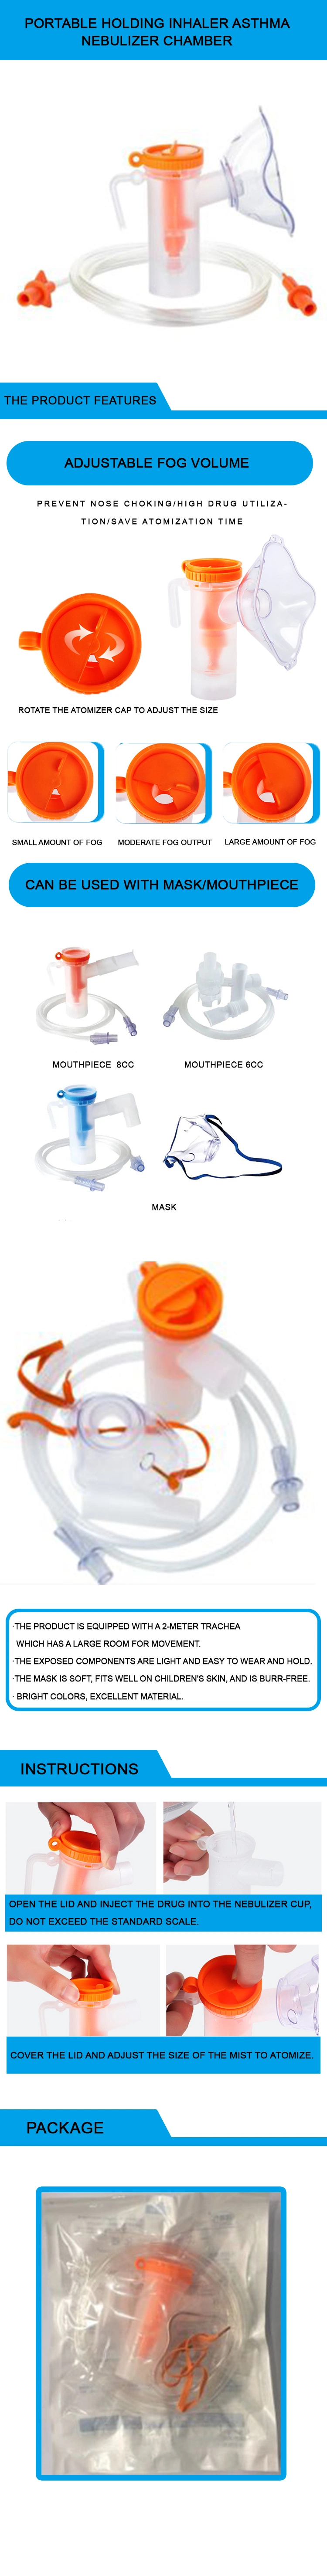 Reusable PVC and Silicone Asthma Inhaler Spacer Devices Inhaler Aerosol Chamber